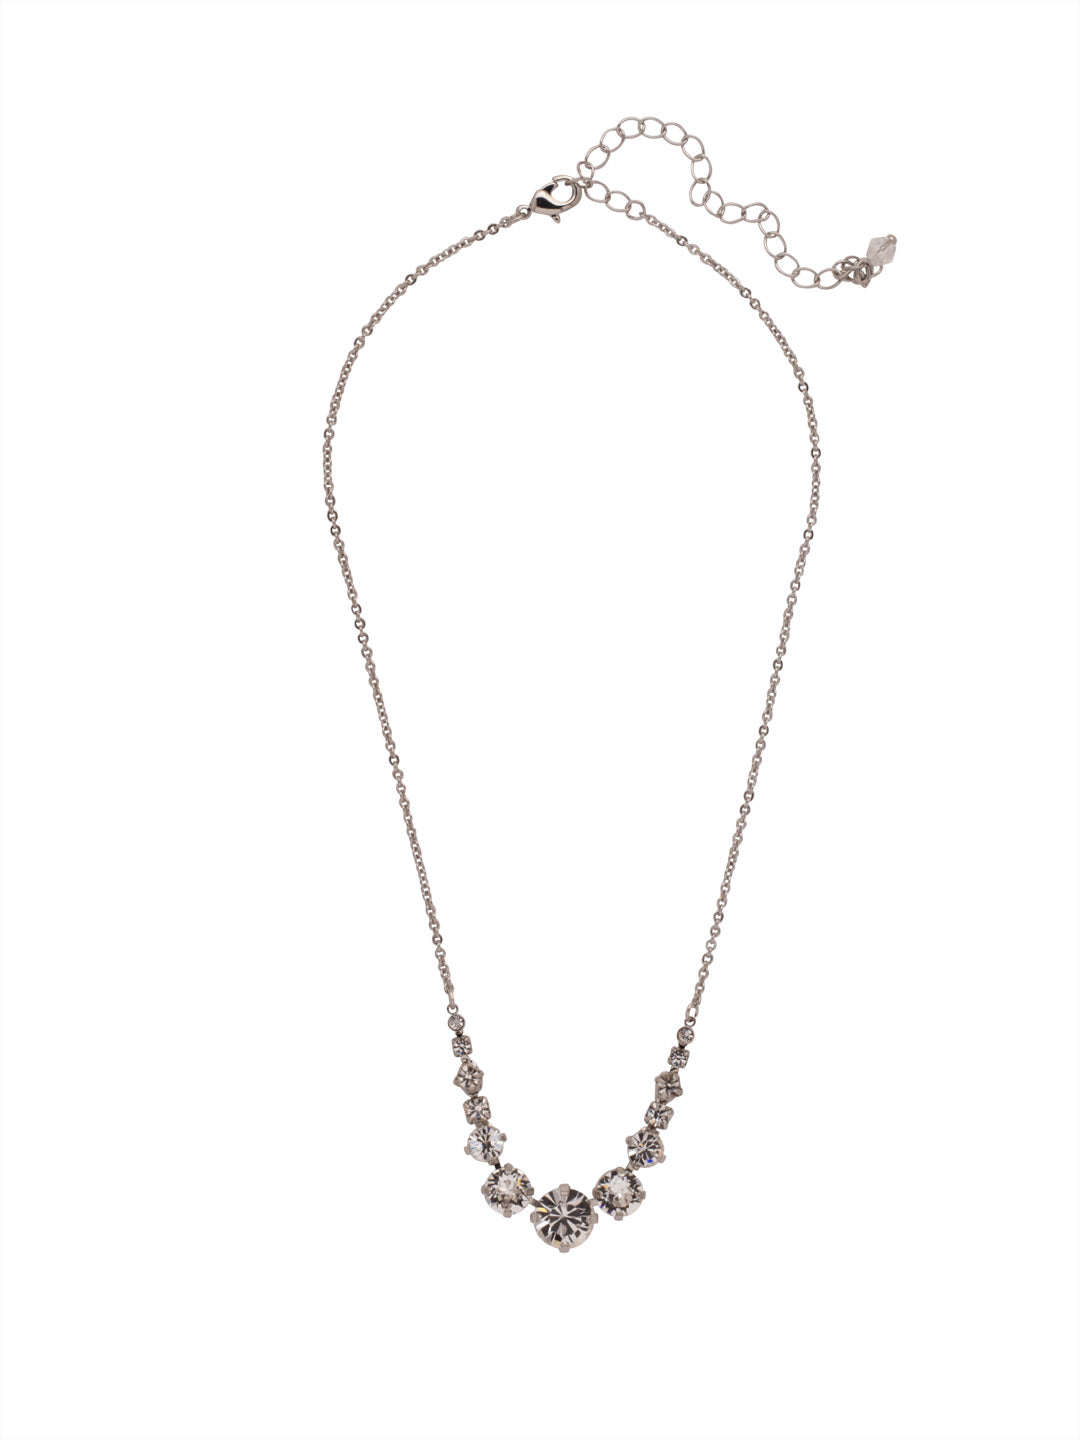 London Tennis Necklace - NCQ14RHCRY - <p>A long, simple chain paired with gorgeous round stones is exactly what every girl needs to dress things up. This round stone necklace is perfect for layering, or to just wear alone. Let the simple sparkle take over. From Sorrelli's Crystal collection in our Palladium Silver-tone finish.</p>